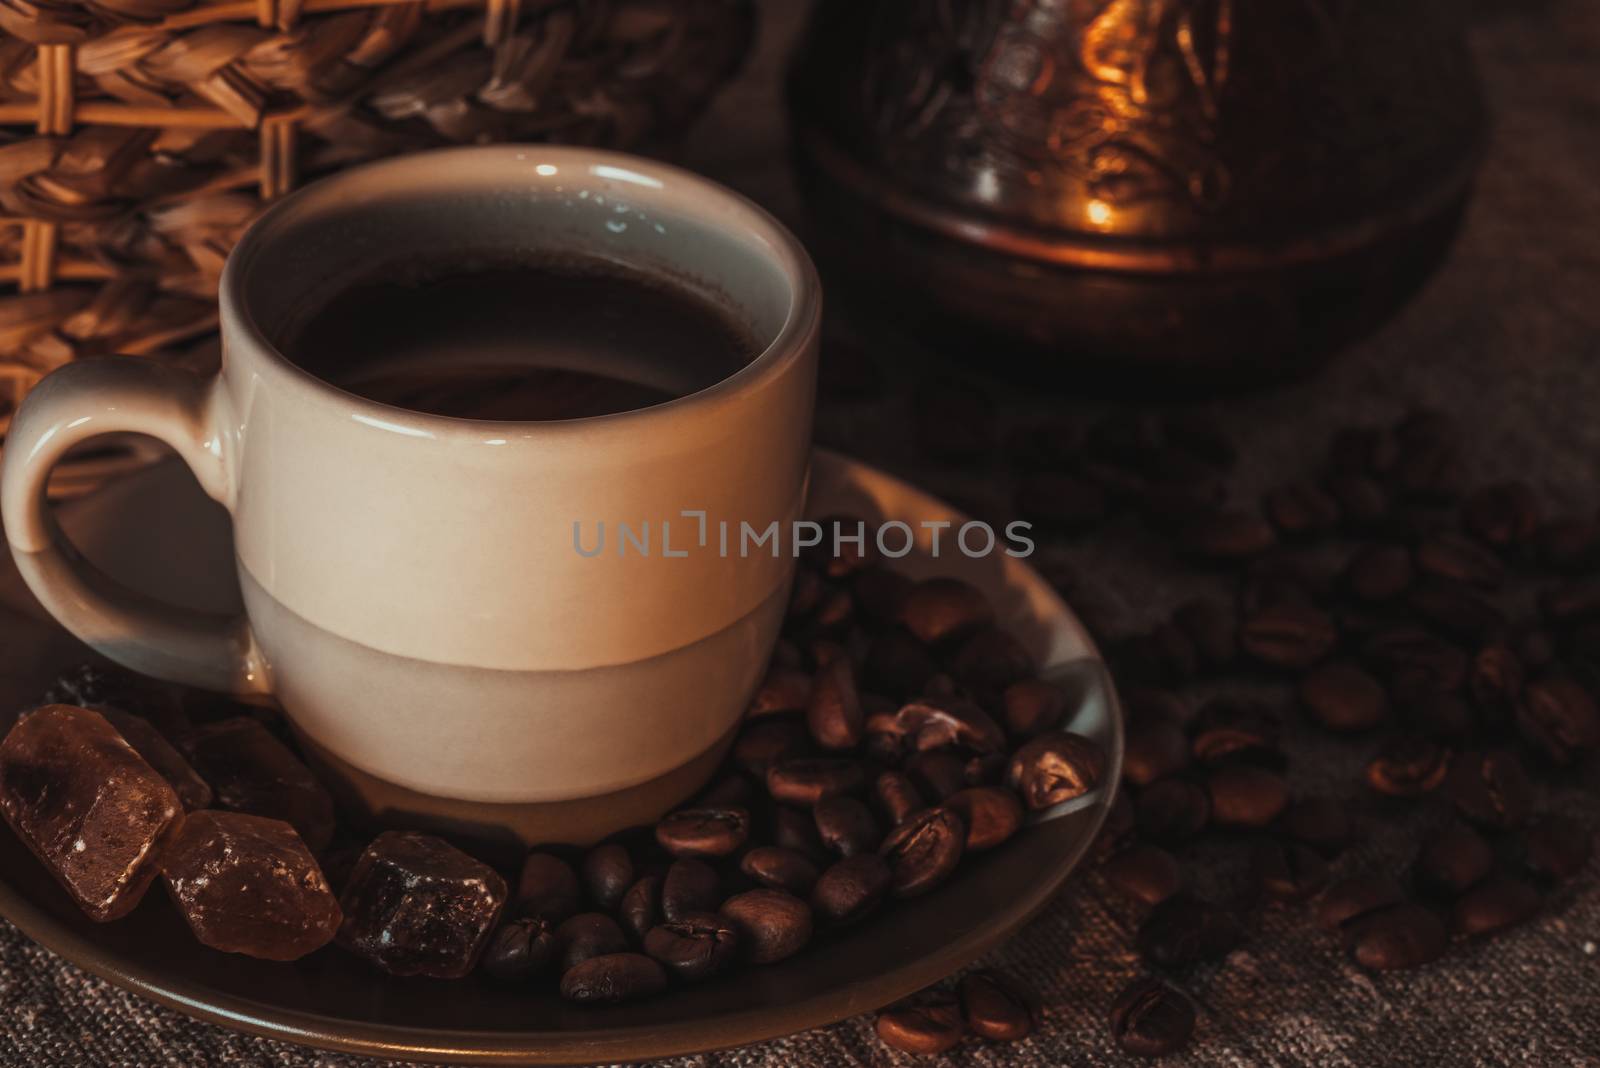 cup of coffee on textile with beans, dark candy sugar, pots, basket and cake by Seva_blsv